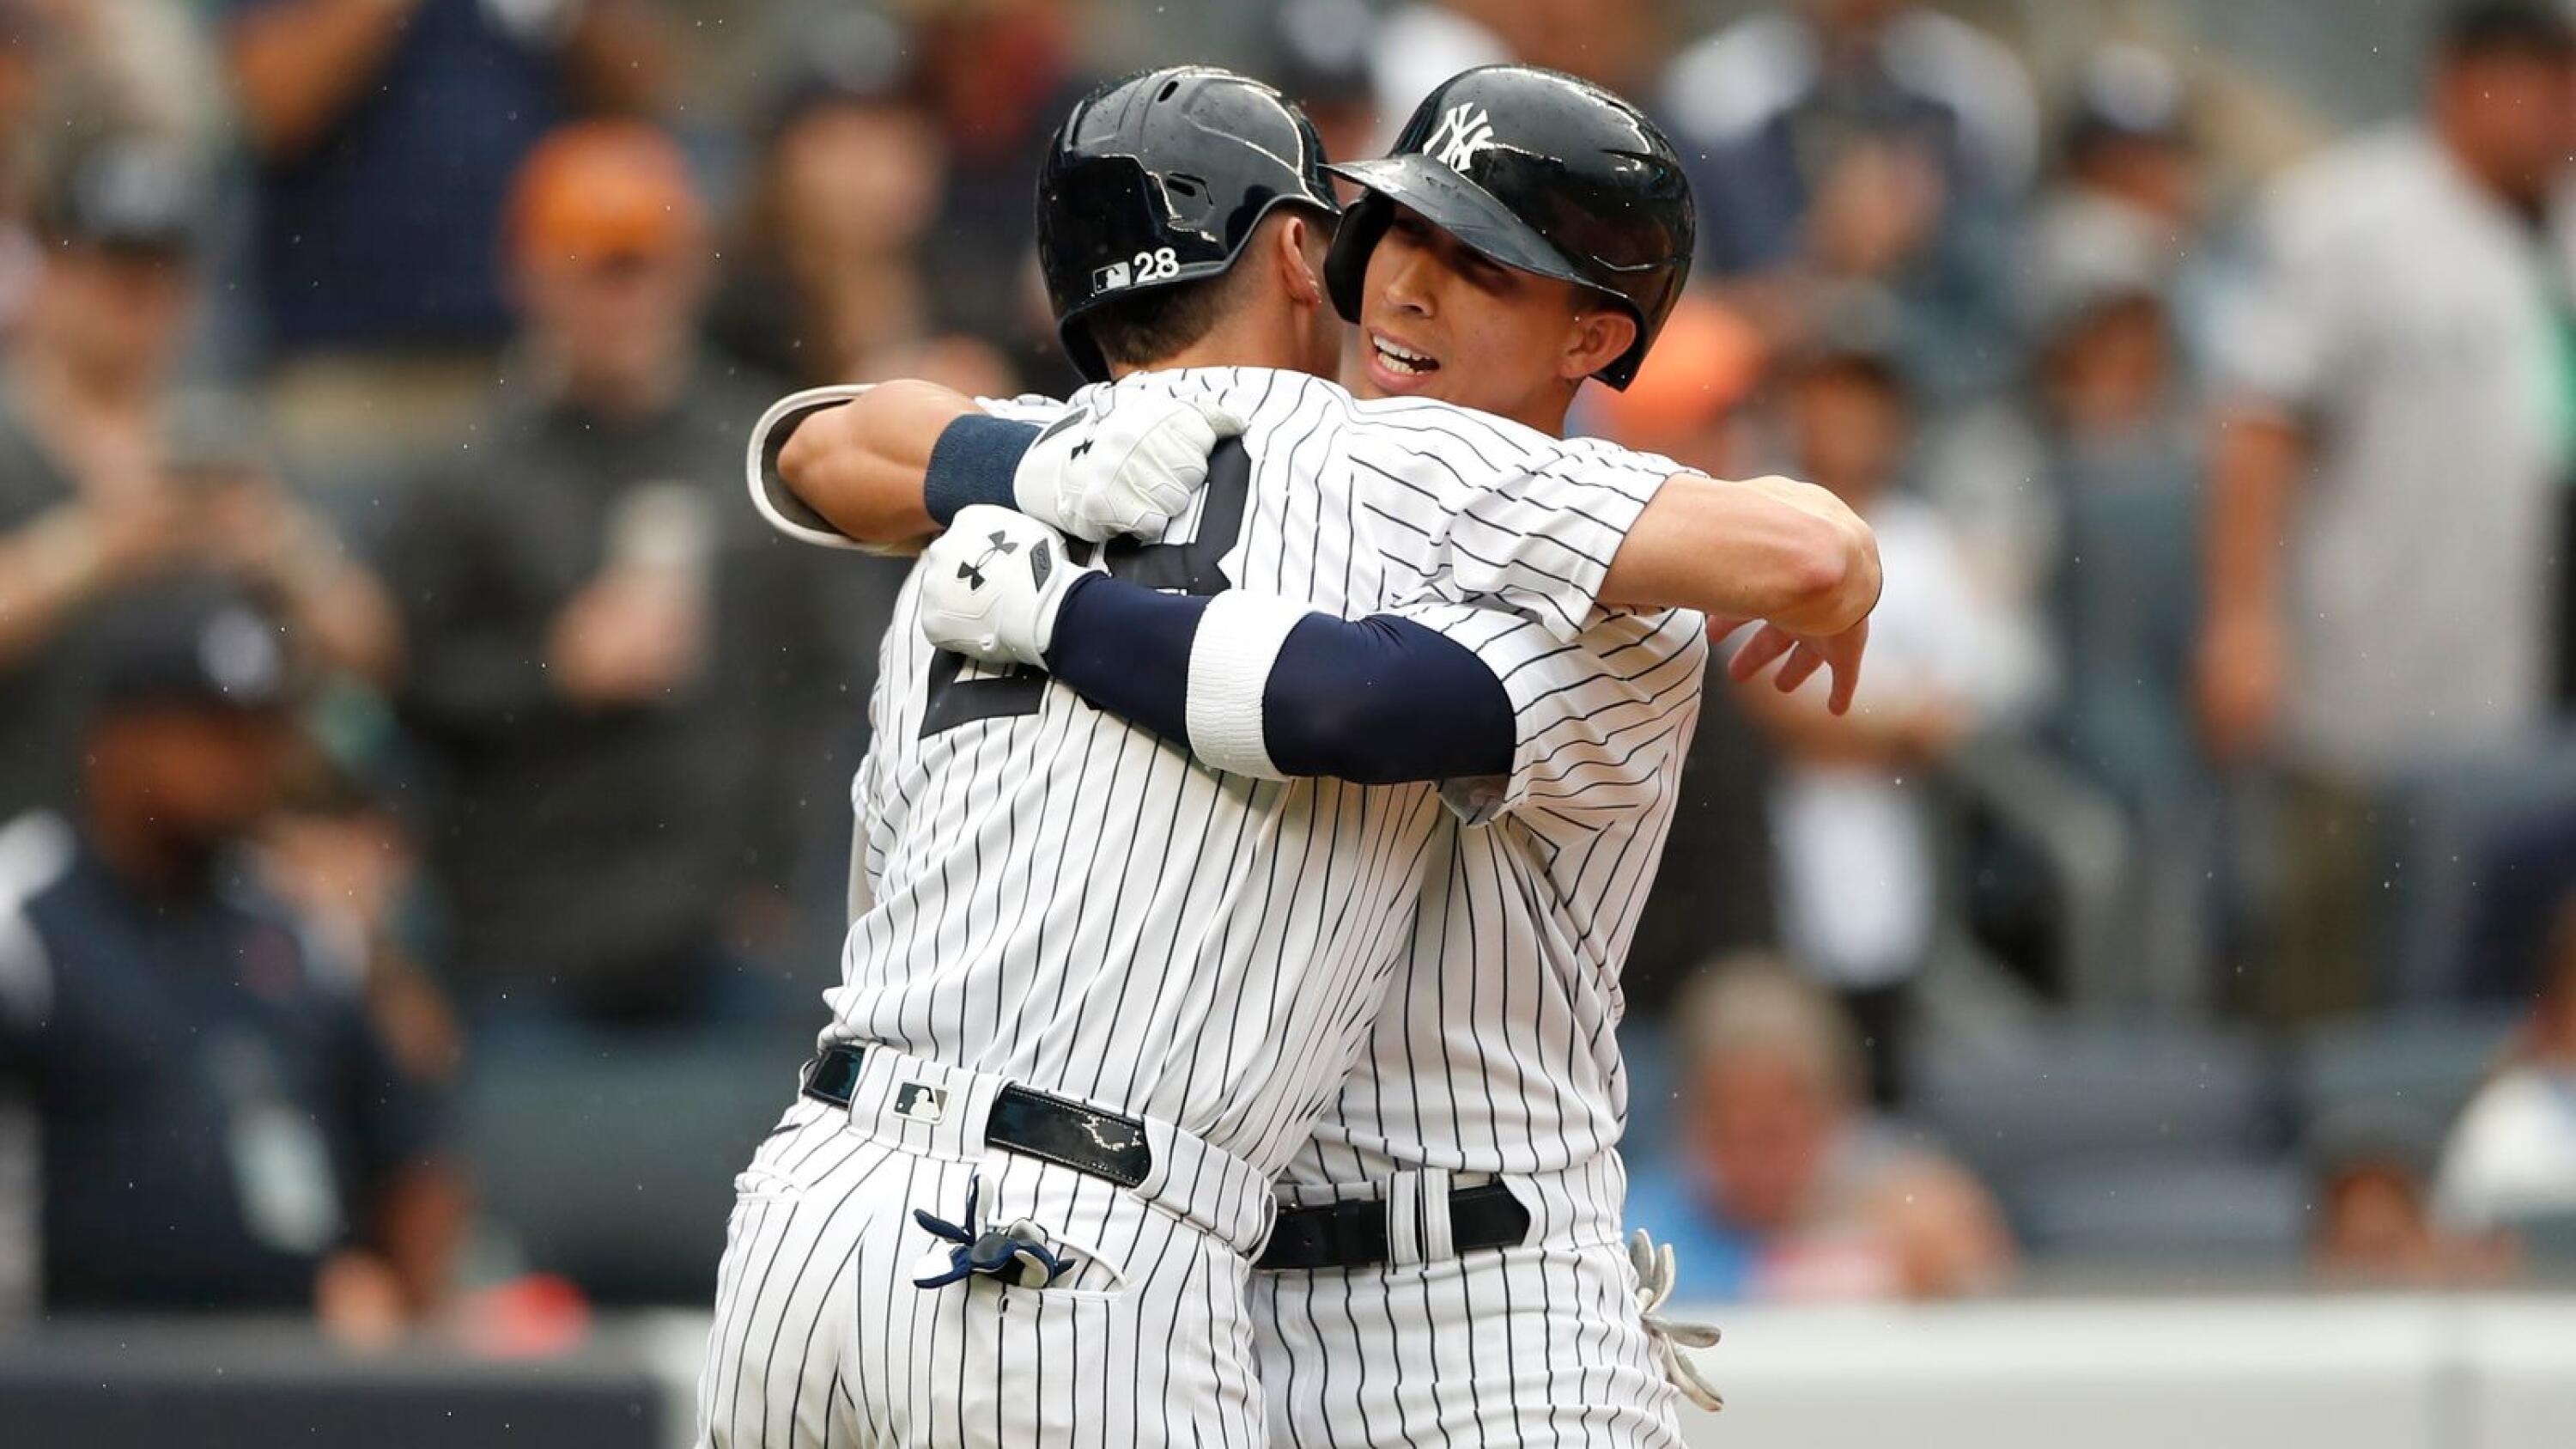 Judge hits 2 of Yanks' 6 HRs in rout of Cubs, 10th win in 11